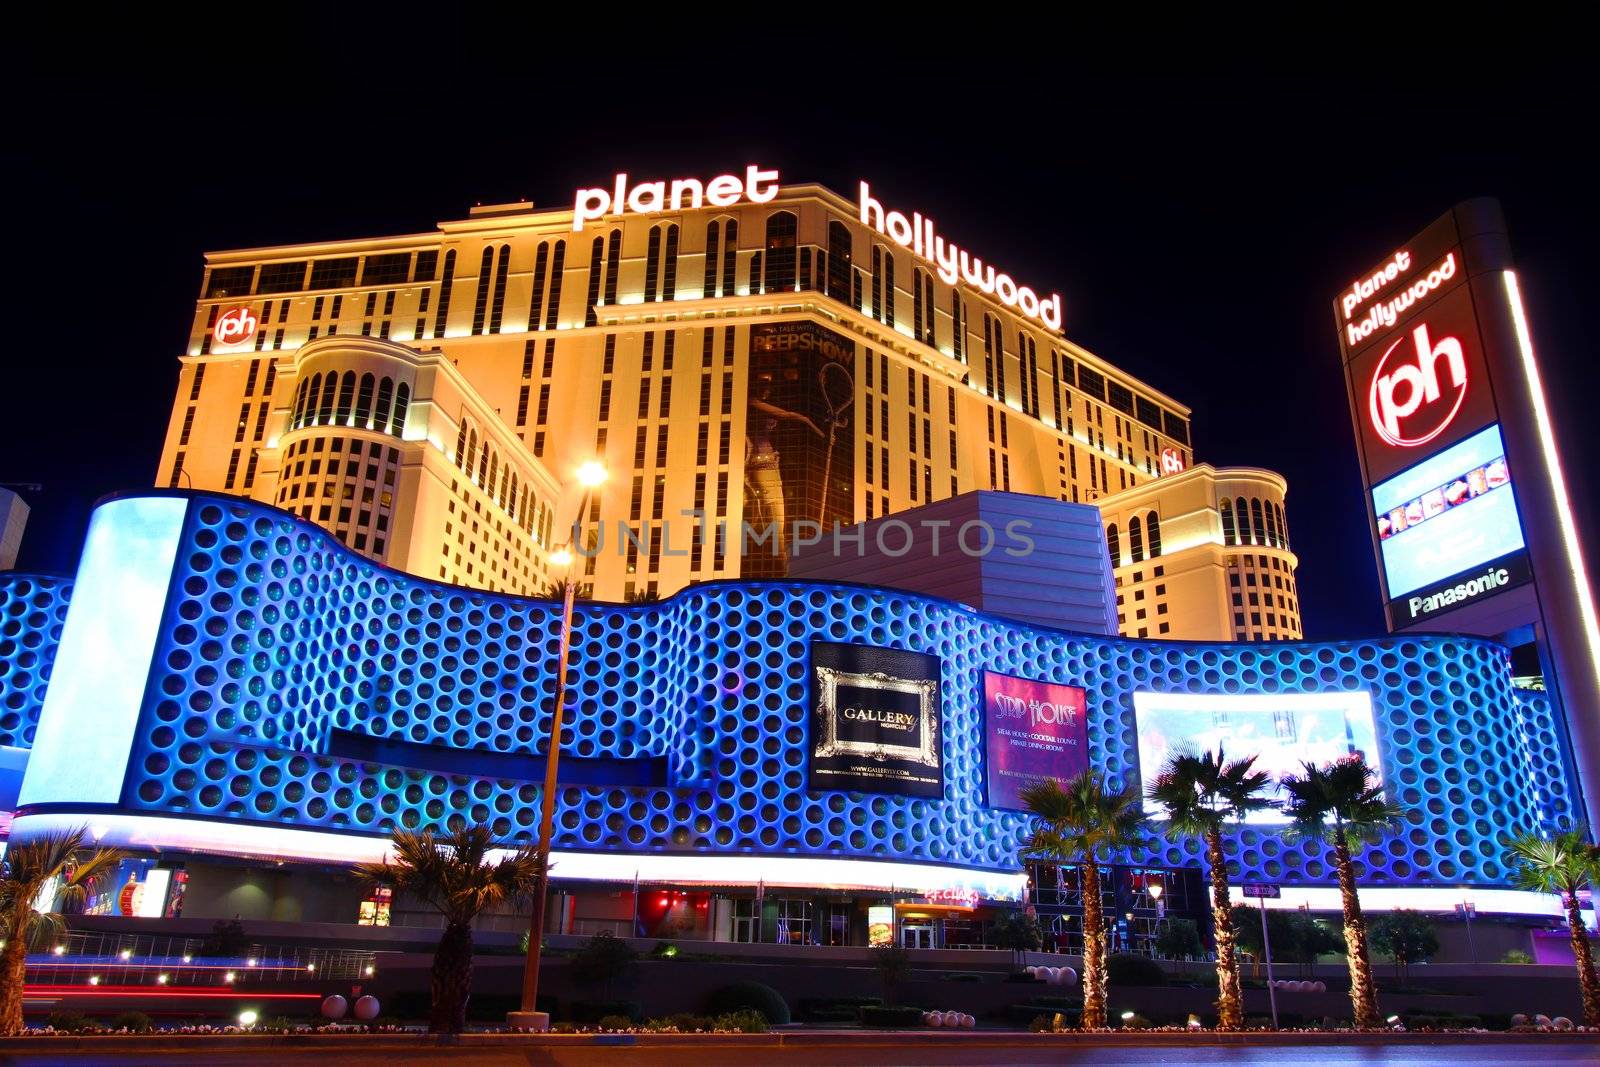 Planet Hollywood Las Vegas by Wirepec